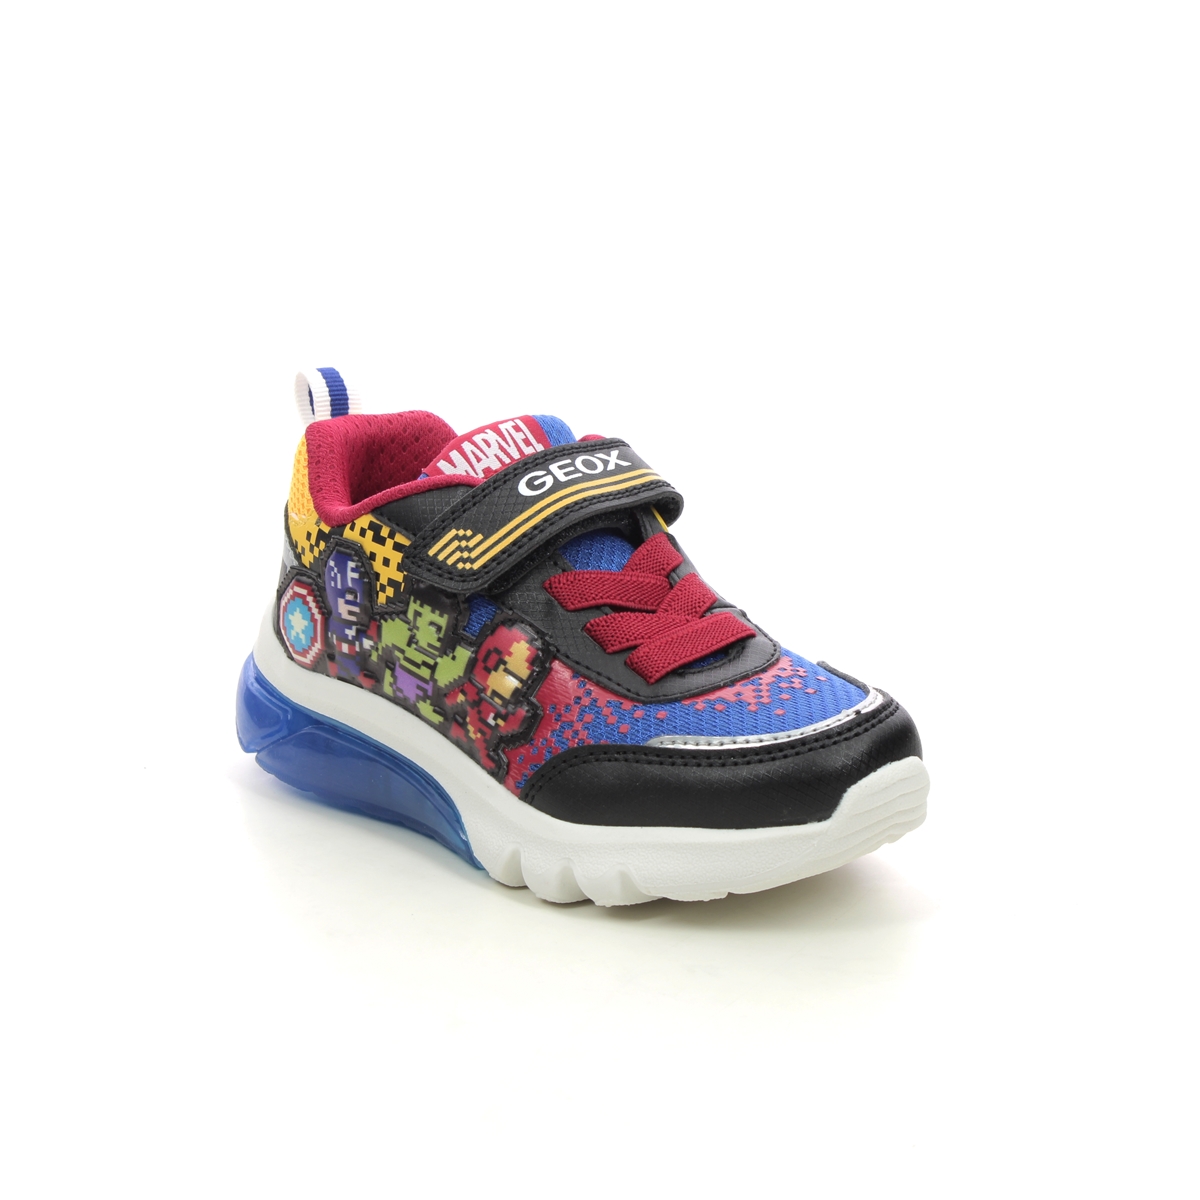 Geox Avengers Marvel Multi Coloured Kids trainers J45LBE-C0245 in a Plain Man-made in Size 30